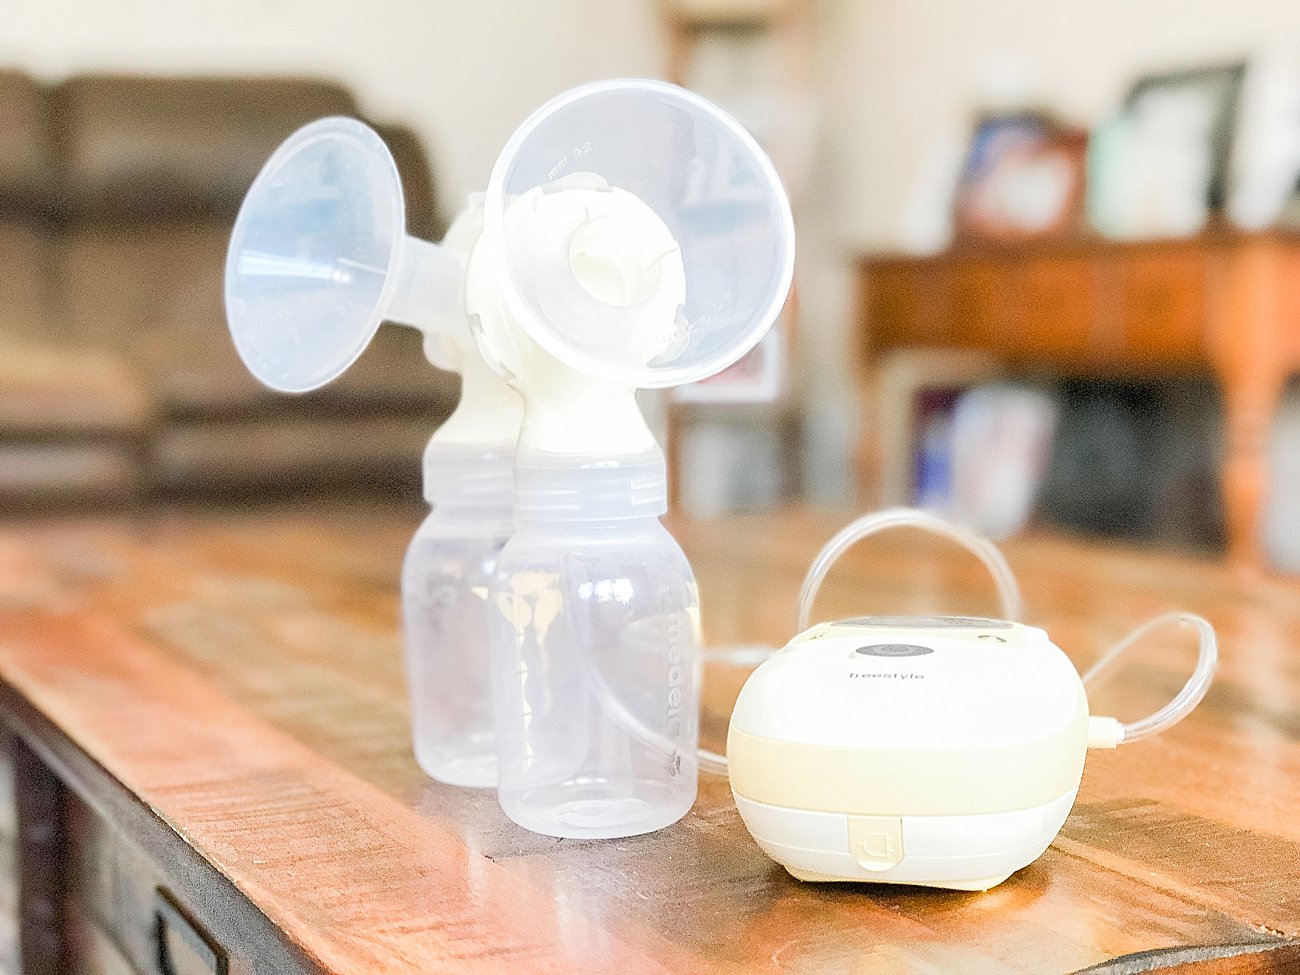 What to Do When Traveling to a Third World Country / Developing Nation and You're Still Breastfeeding - Tips for Pumping While Traveling - Medela Freestyle Breast Pump Review